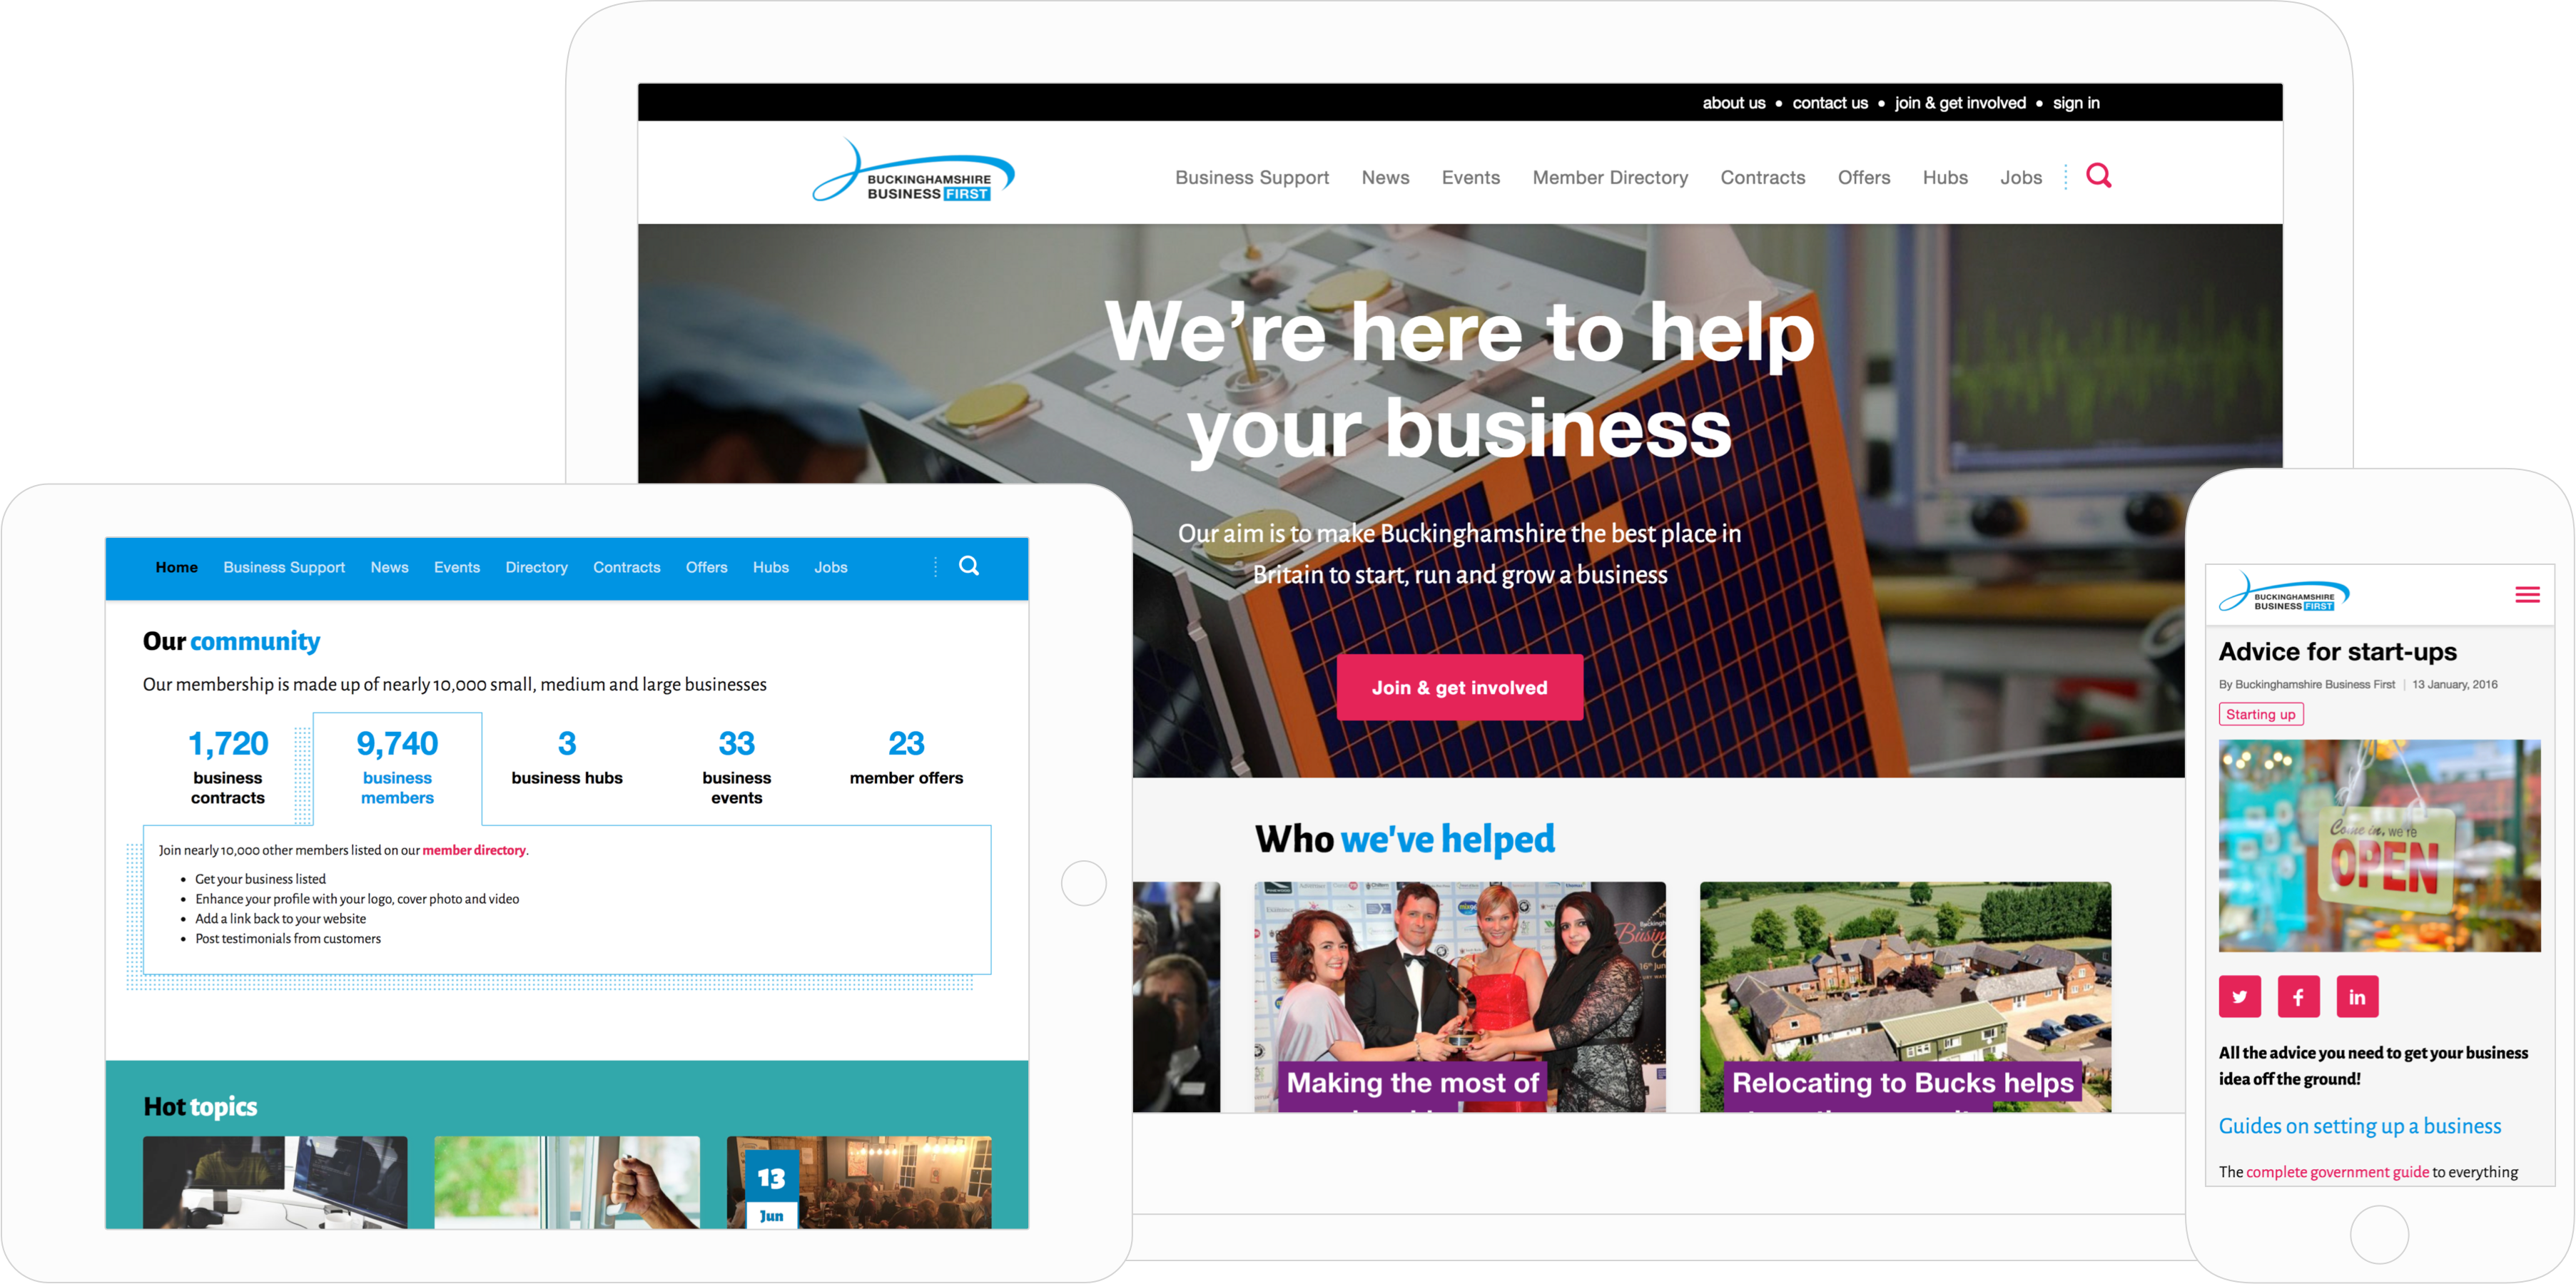 Buckinghamshire Business First website home page on laptop